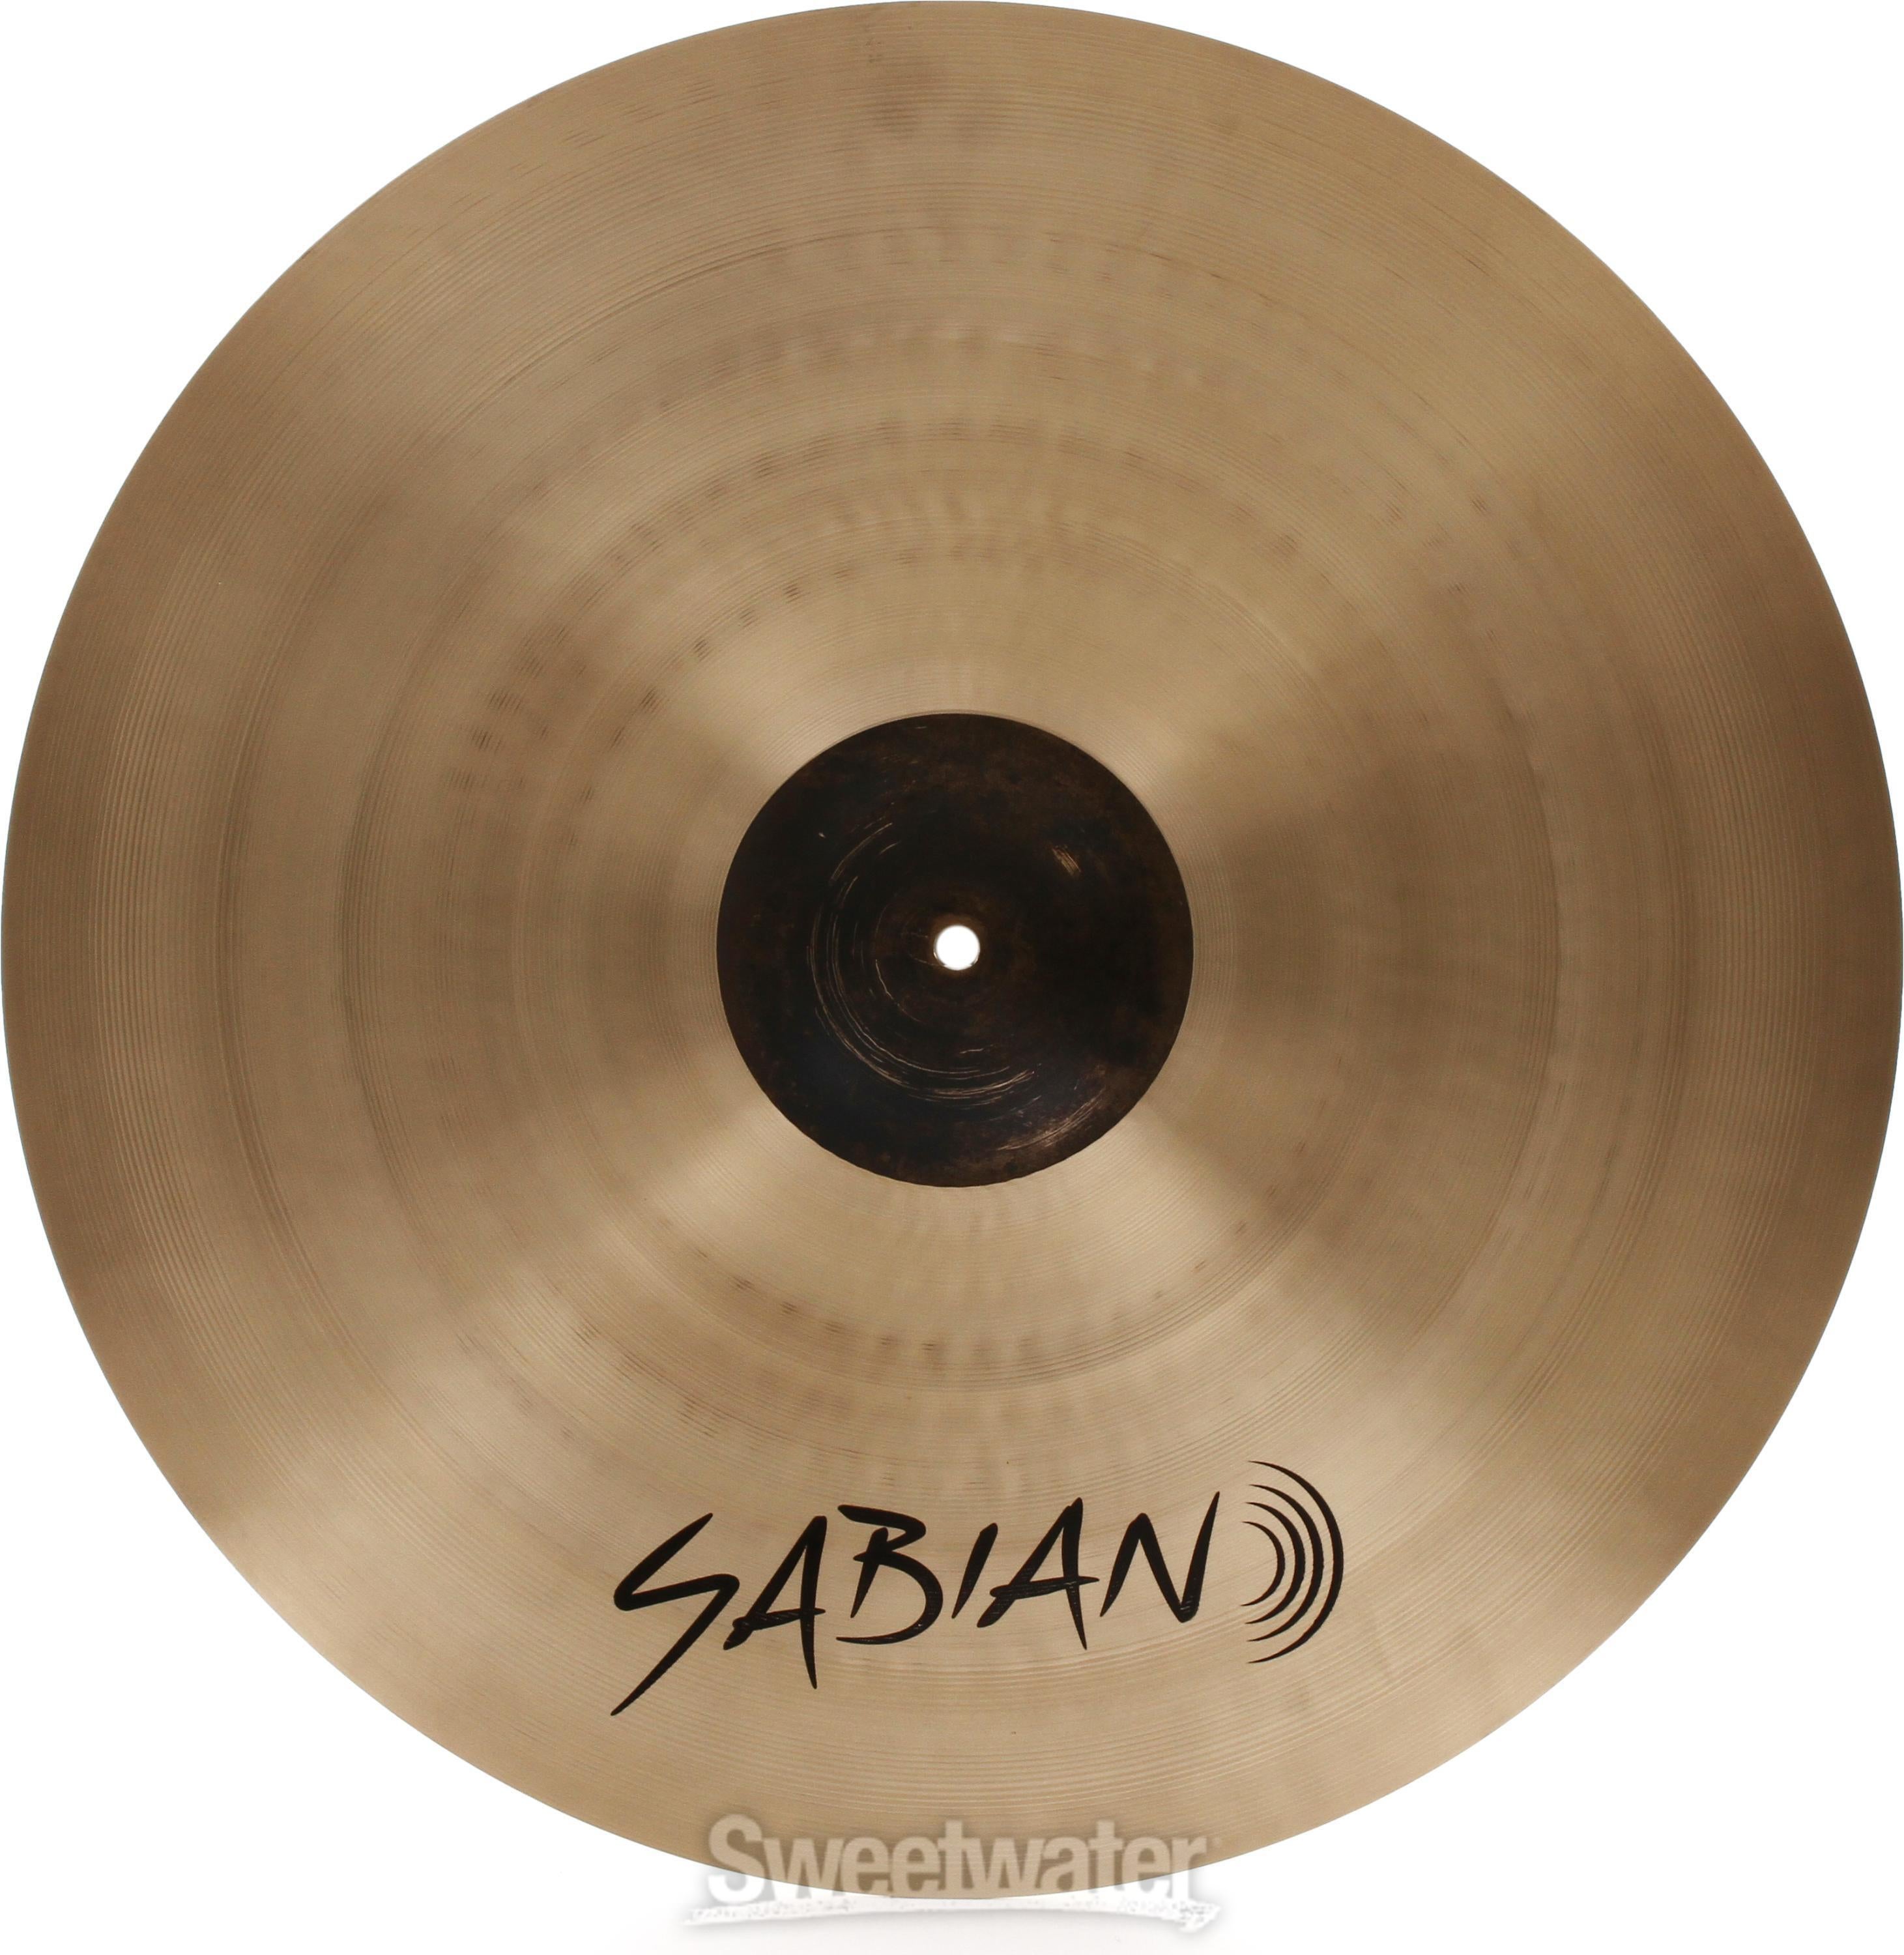 Sabian 21 inch AAX Raw Bell Dry Ride Cymbal | Sweetwater